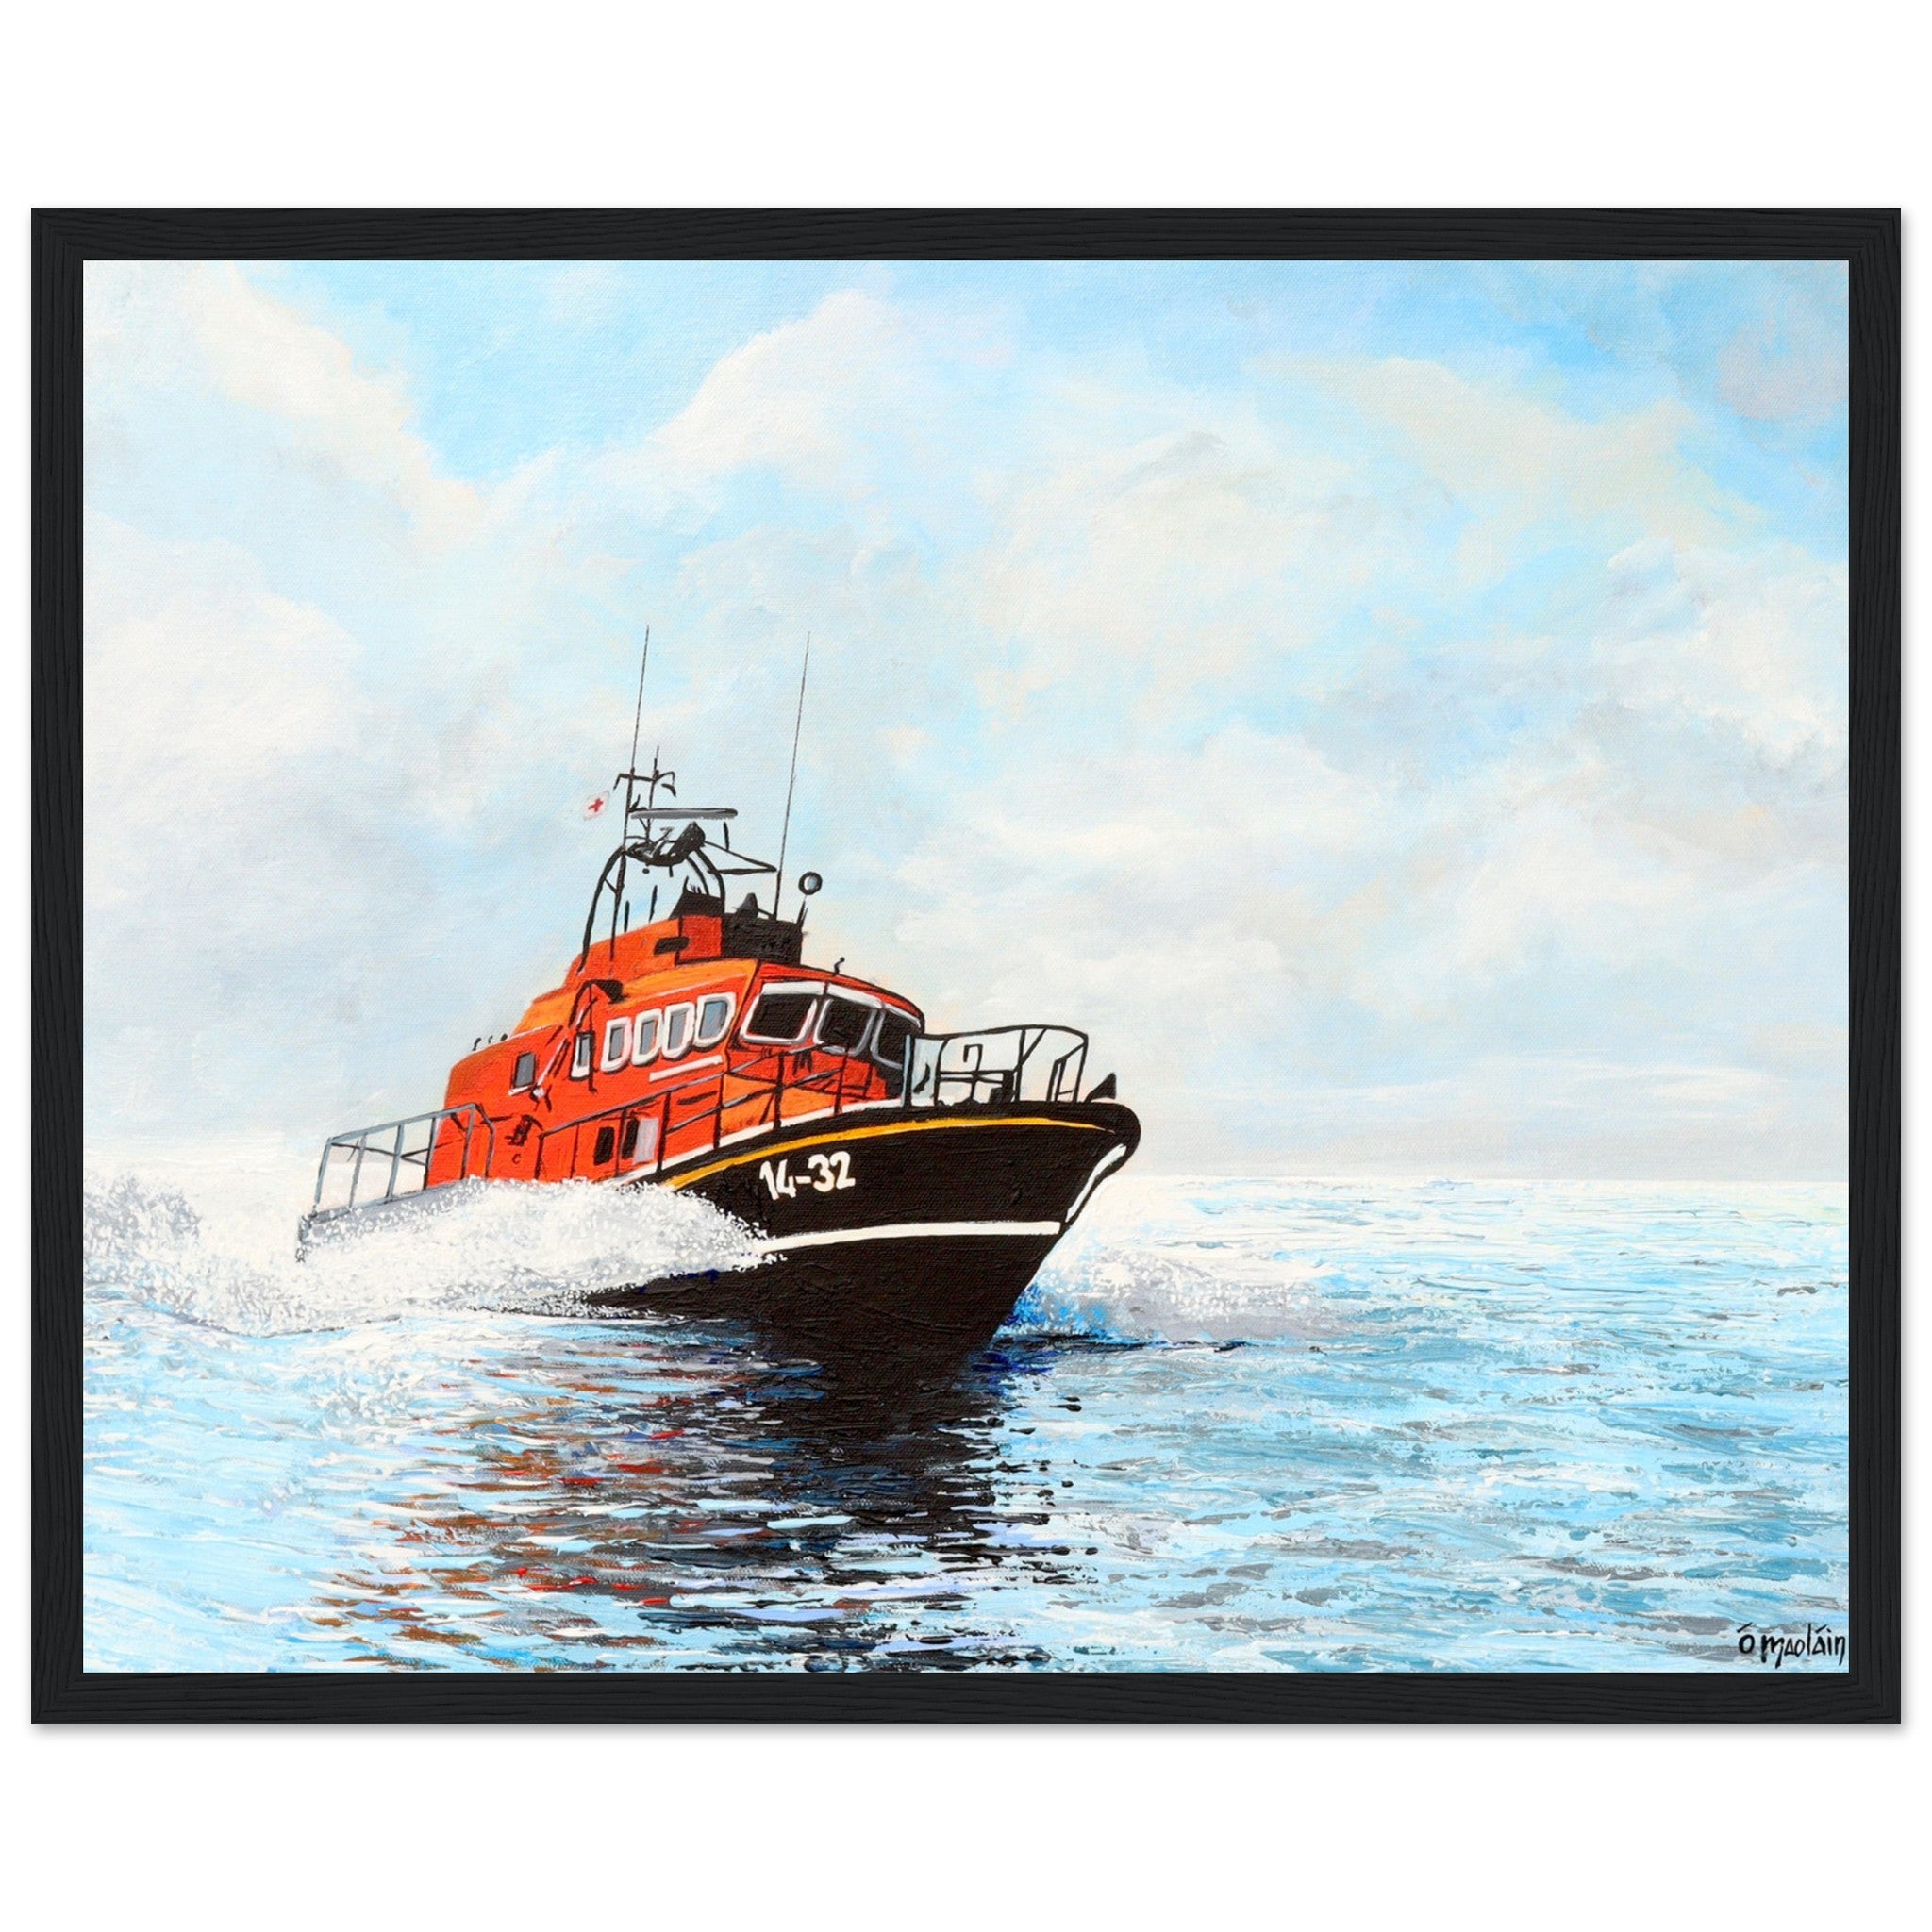 Black framed art print of an RNLI lifeboat battling waves, celebrating the bravery of lifeboat crews. Available in multiple colour frame and finishes. Perfect for any nautical enthusiasts that support the RNLI's life-saving missions.